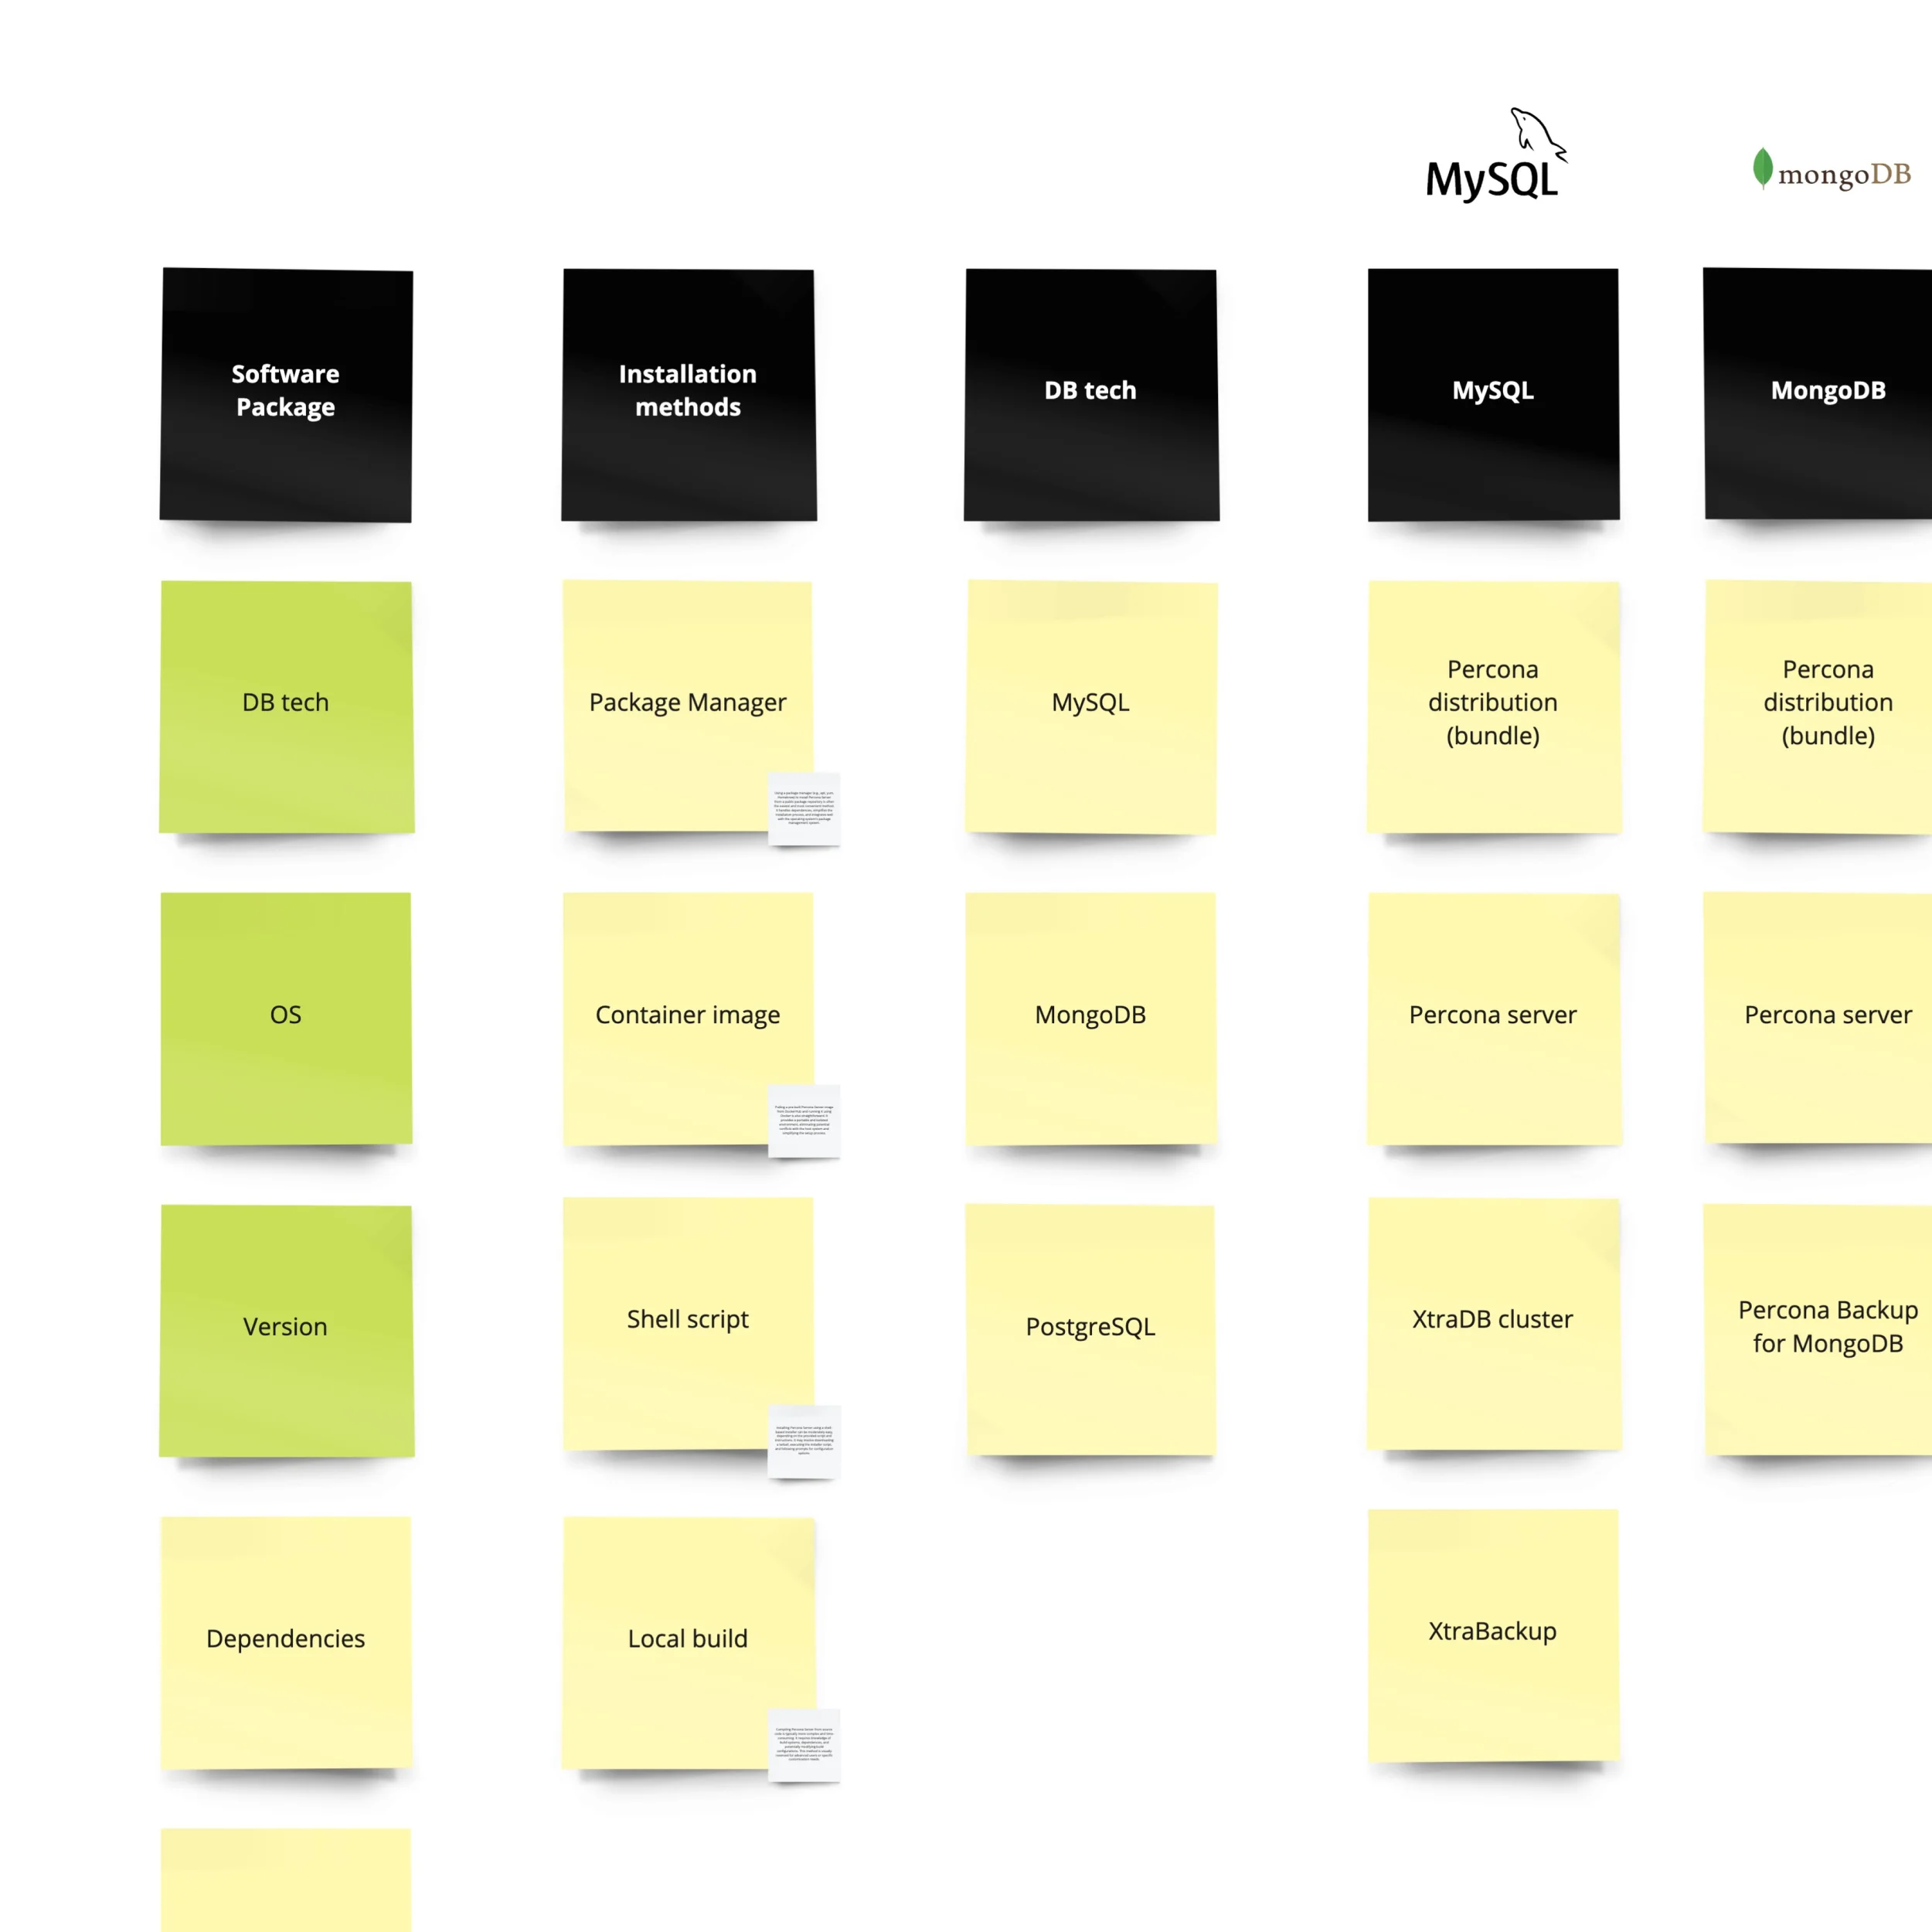 Post-its with concepts organized into a grid to form relationships and logical clusters of information.